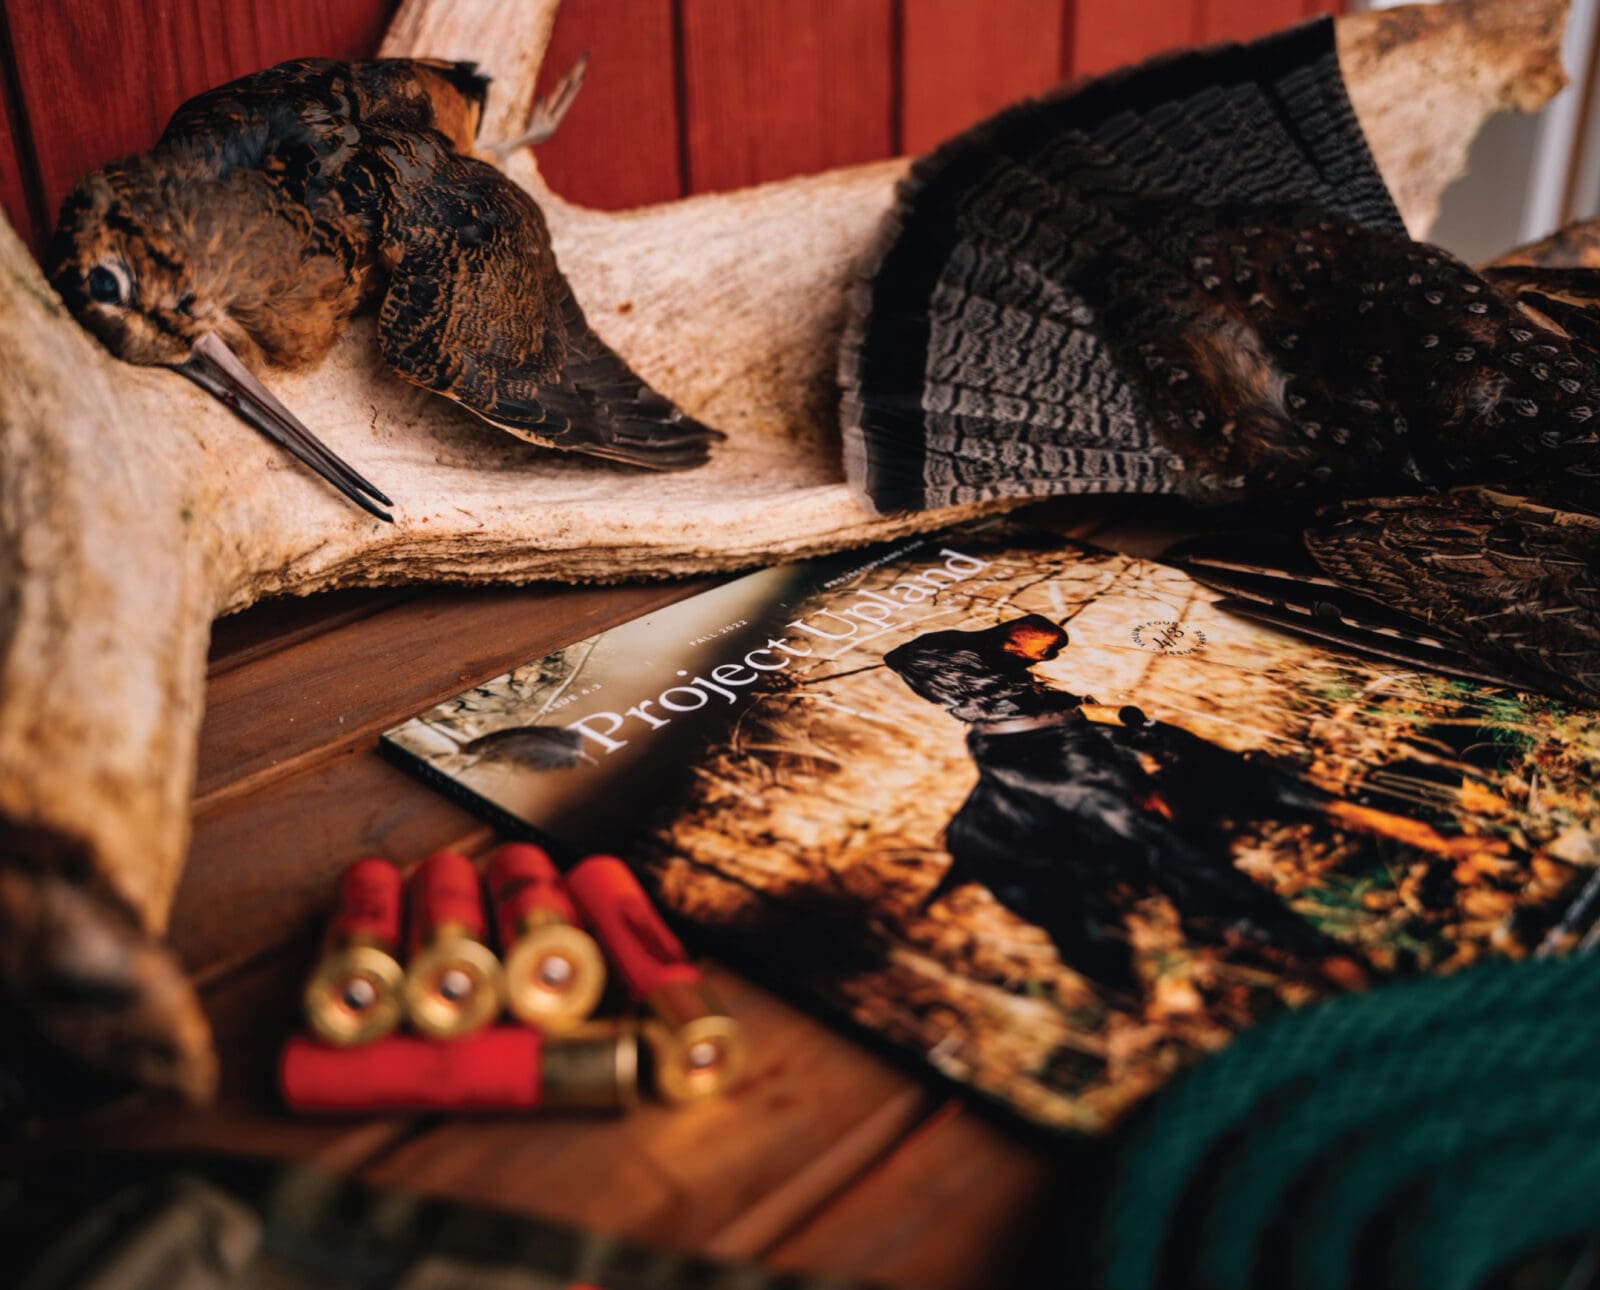 An issue of project upland magazine with some upland hunting gear and grouse